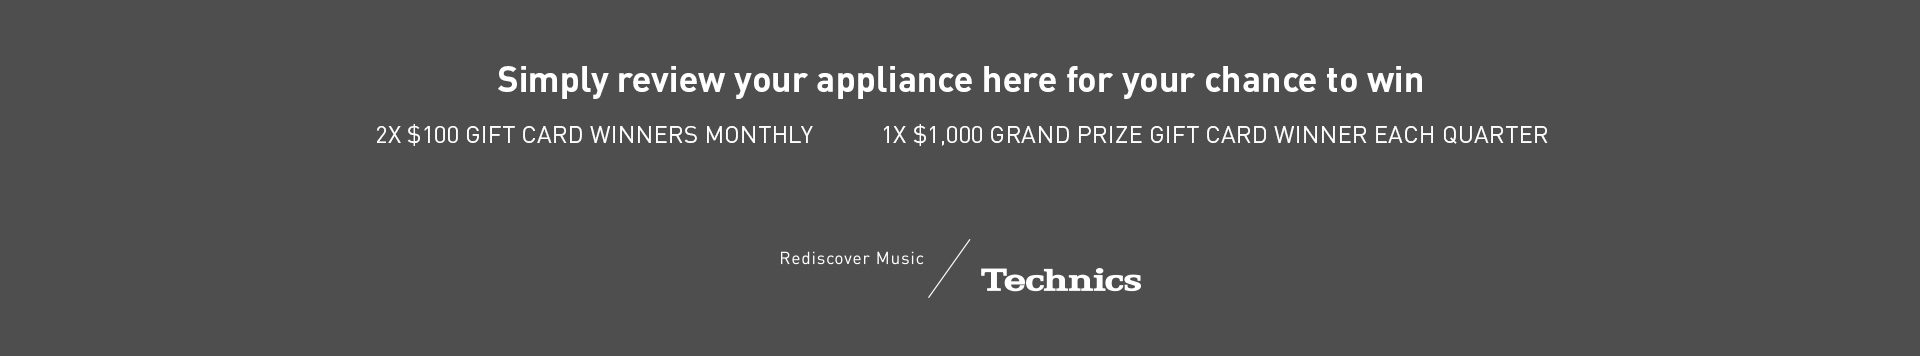 Simply review your appliance here for your chance to win